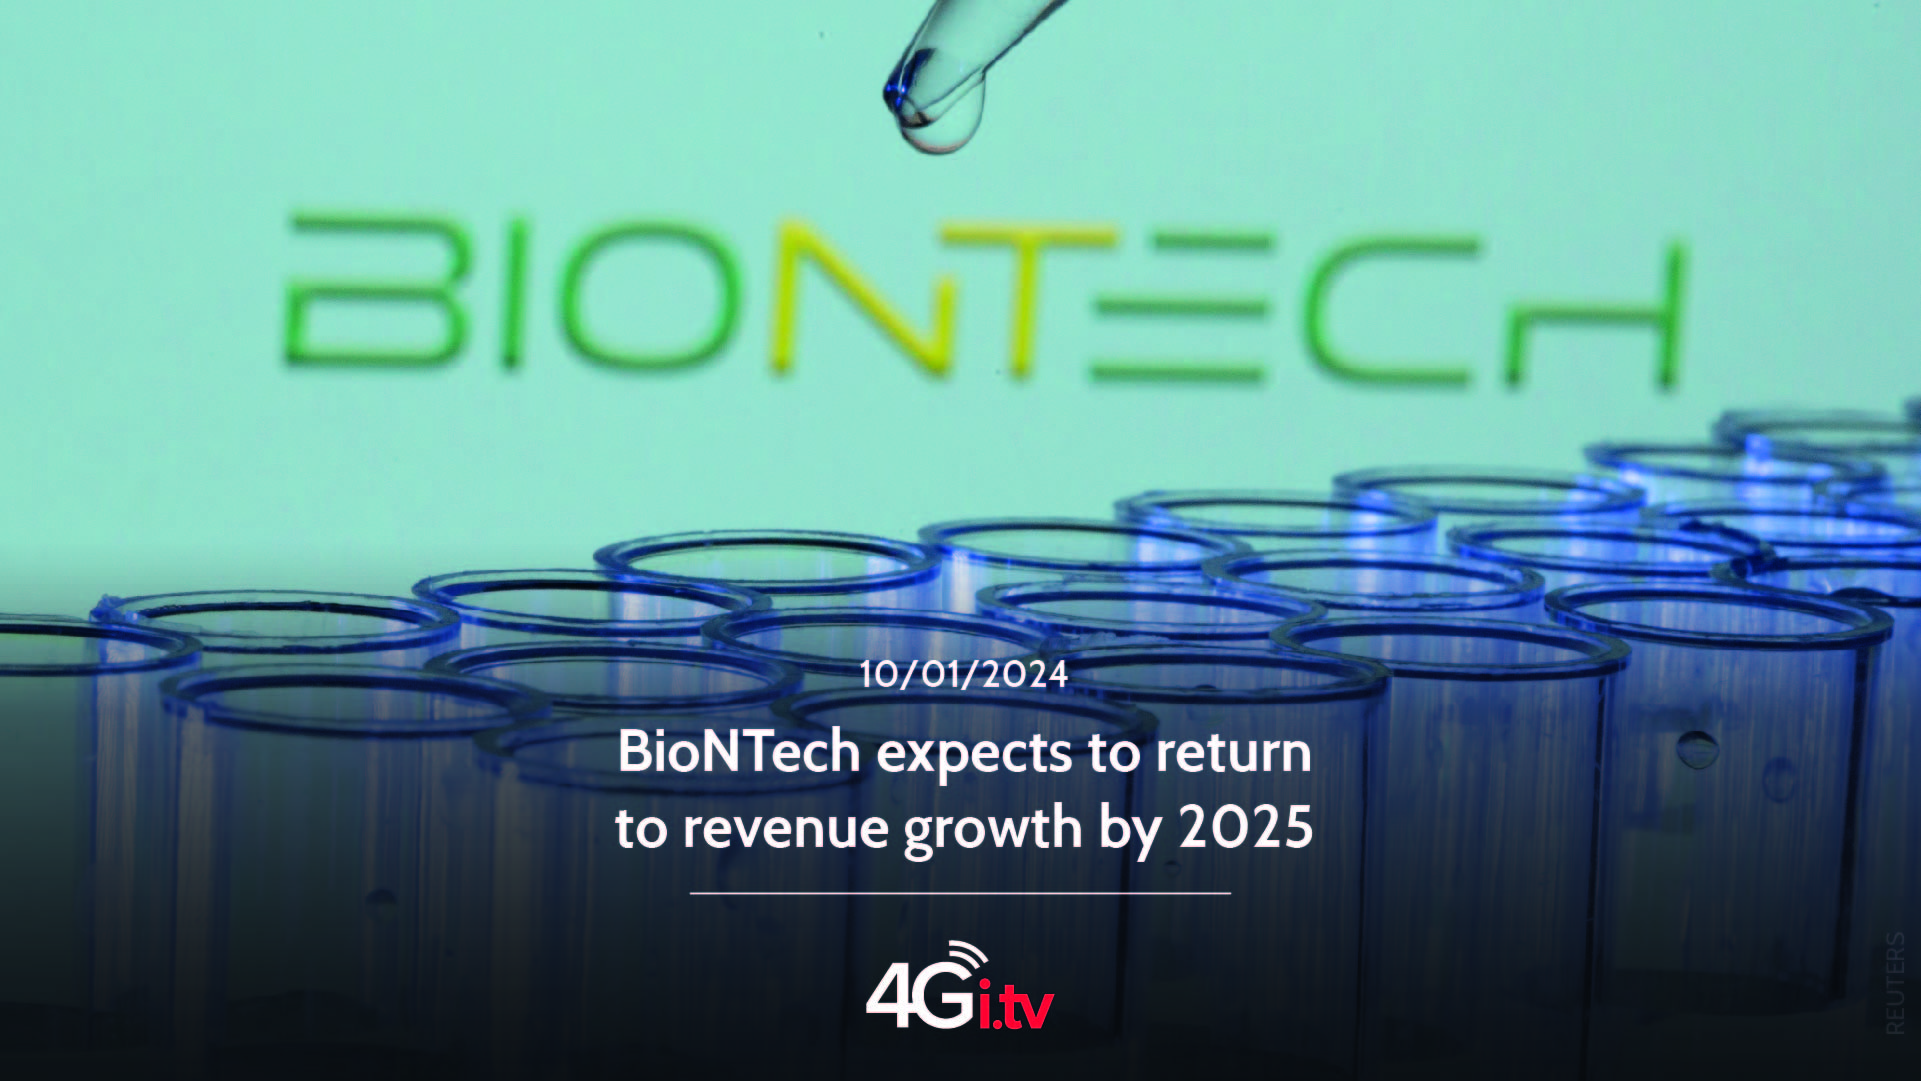 Подробнее о статье BioNTech expects to return to revenue growth by 2025